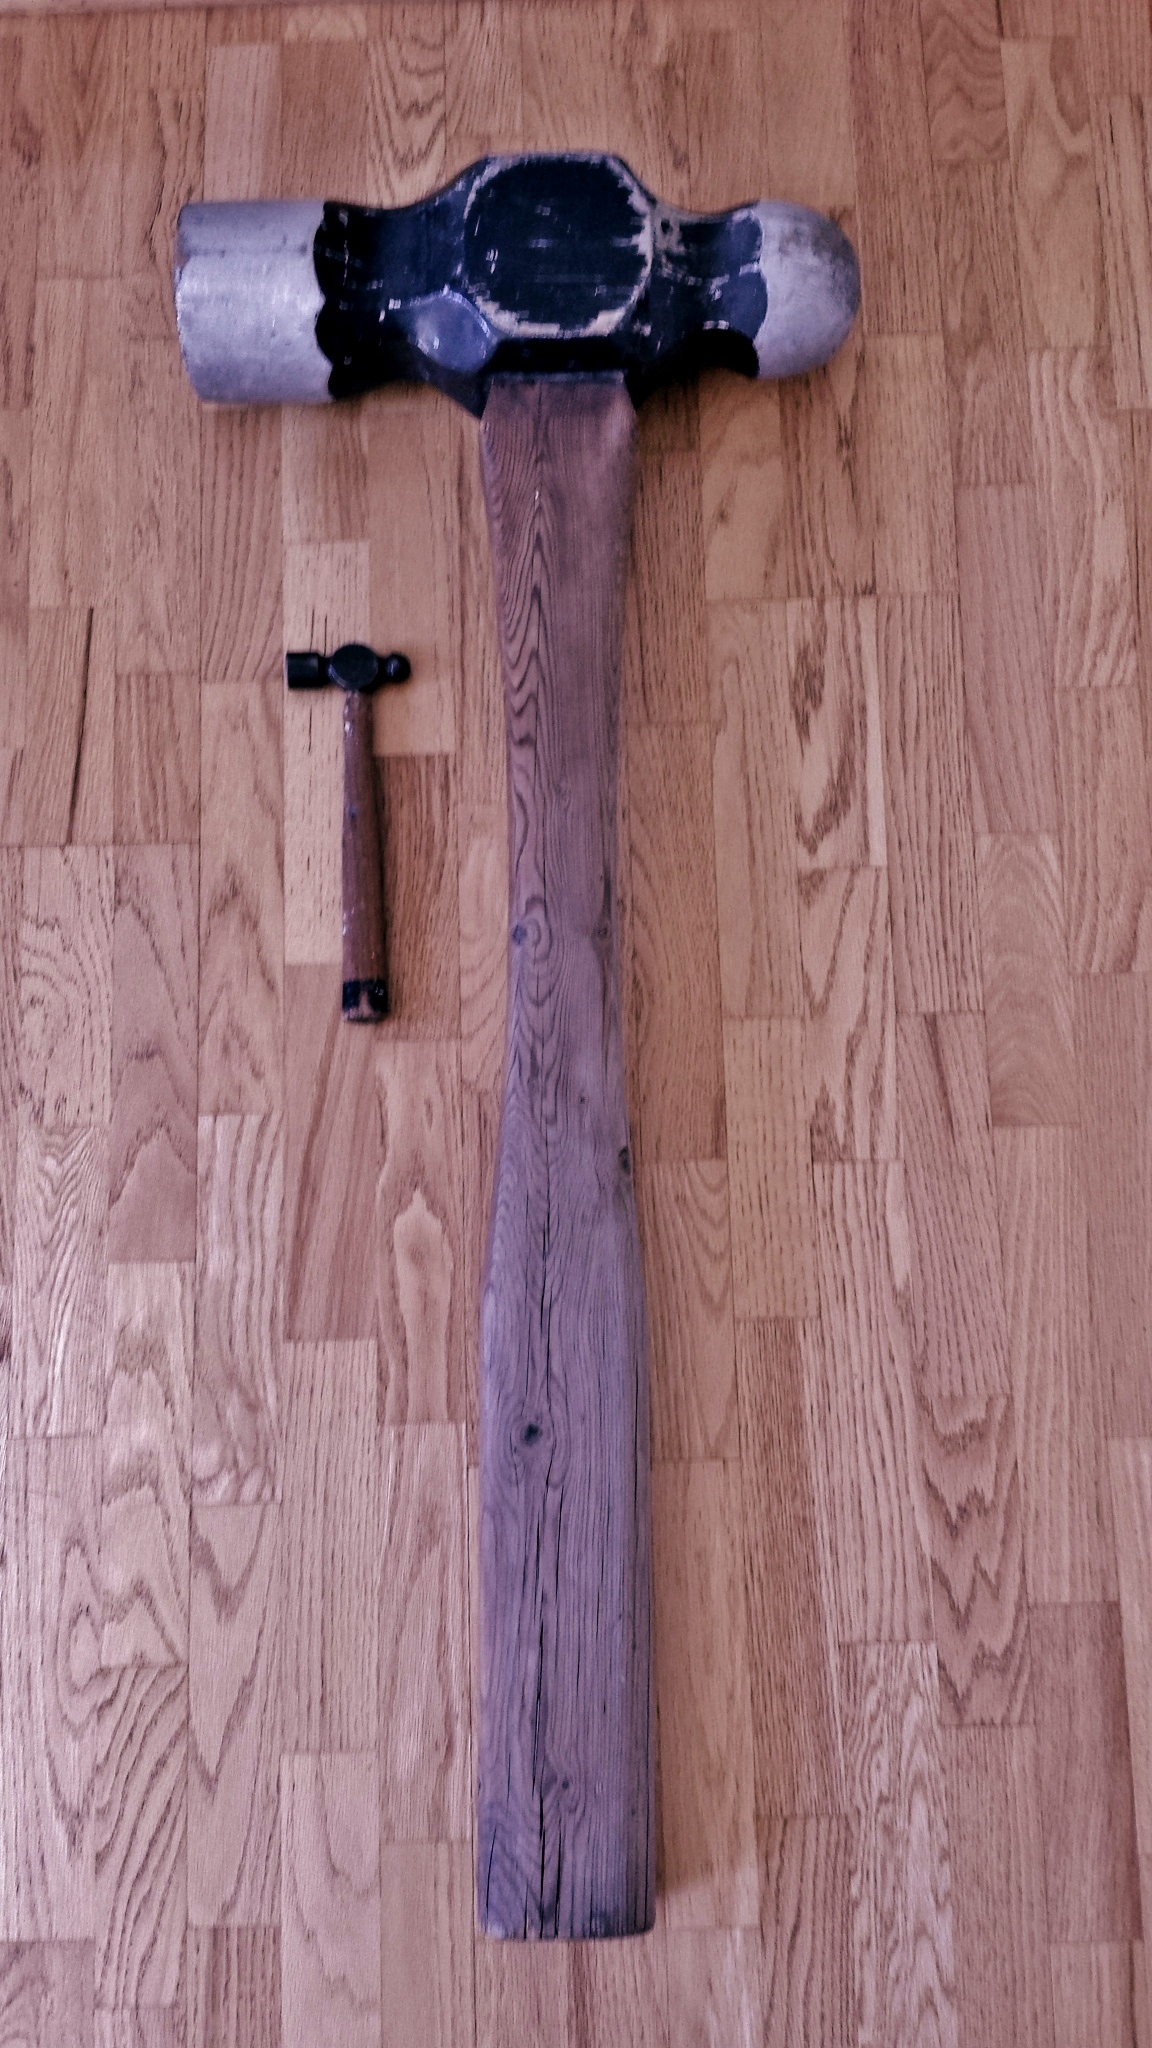 4 FOOT TALL WOOD CARVED HAMMER